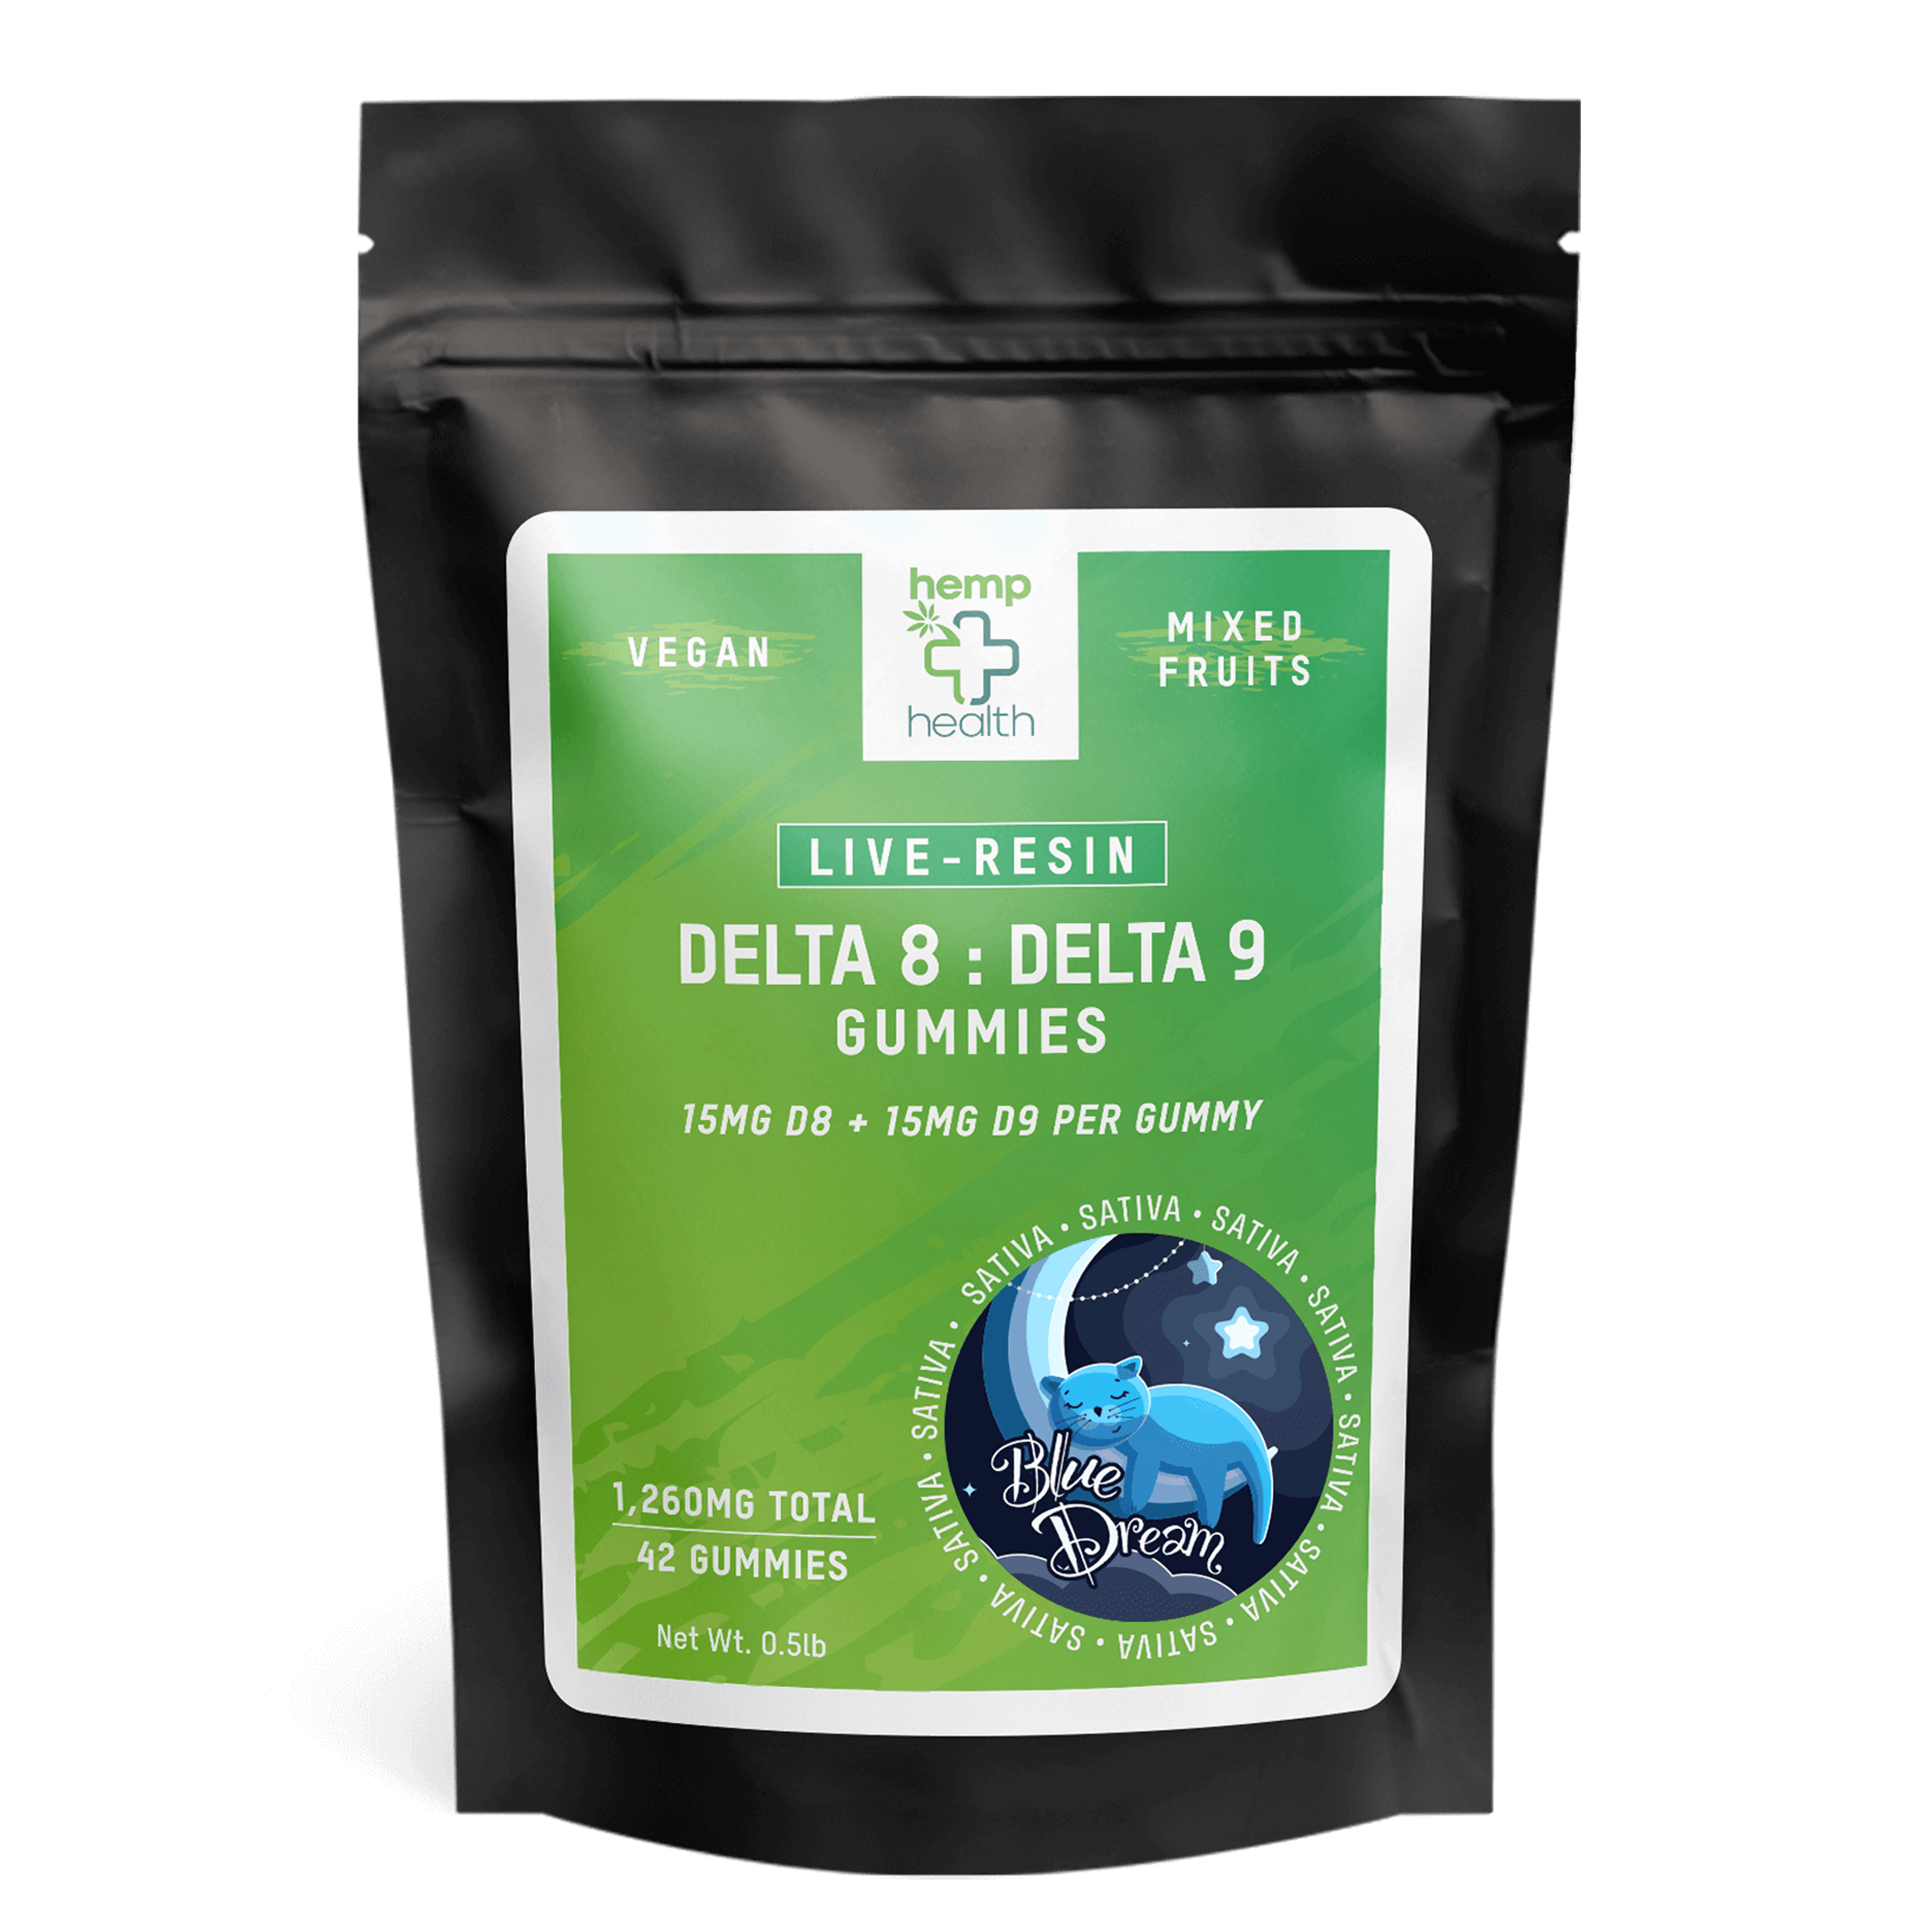 live resin delta 8/9 vegan gummies with 15mg of delta 8 and 15mg of delta 9 THC